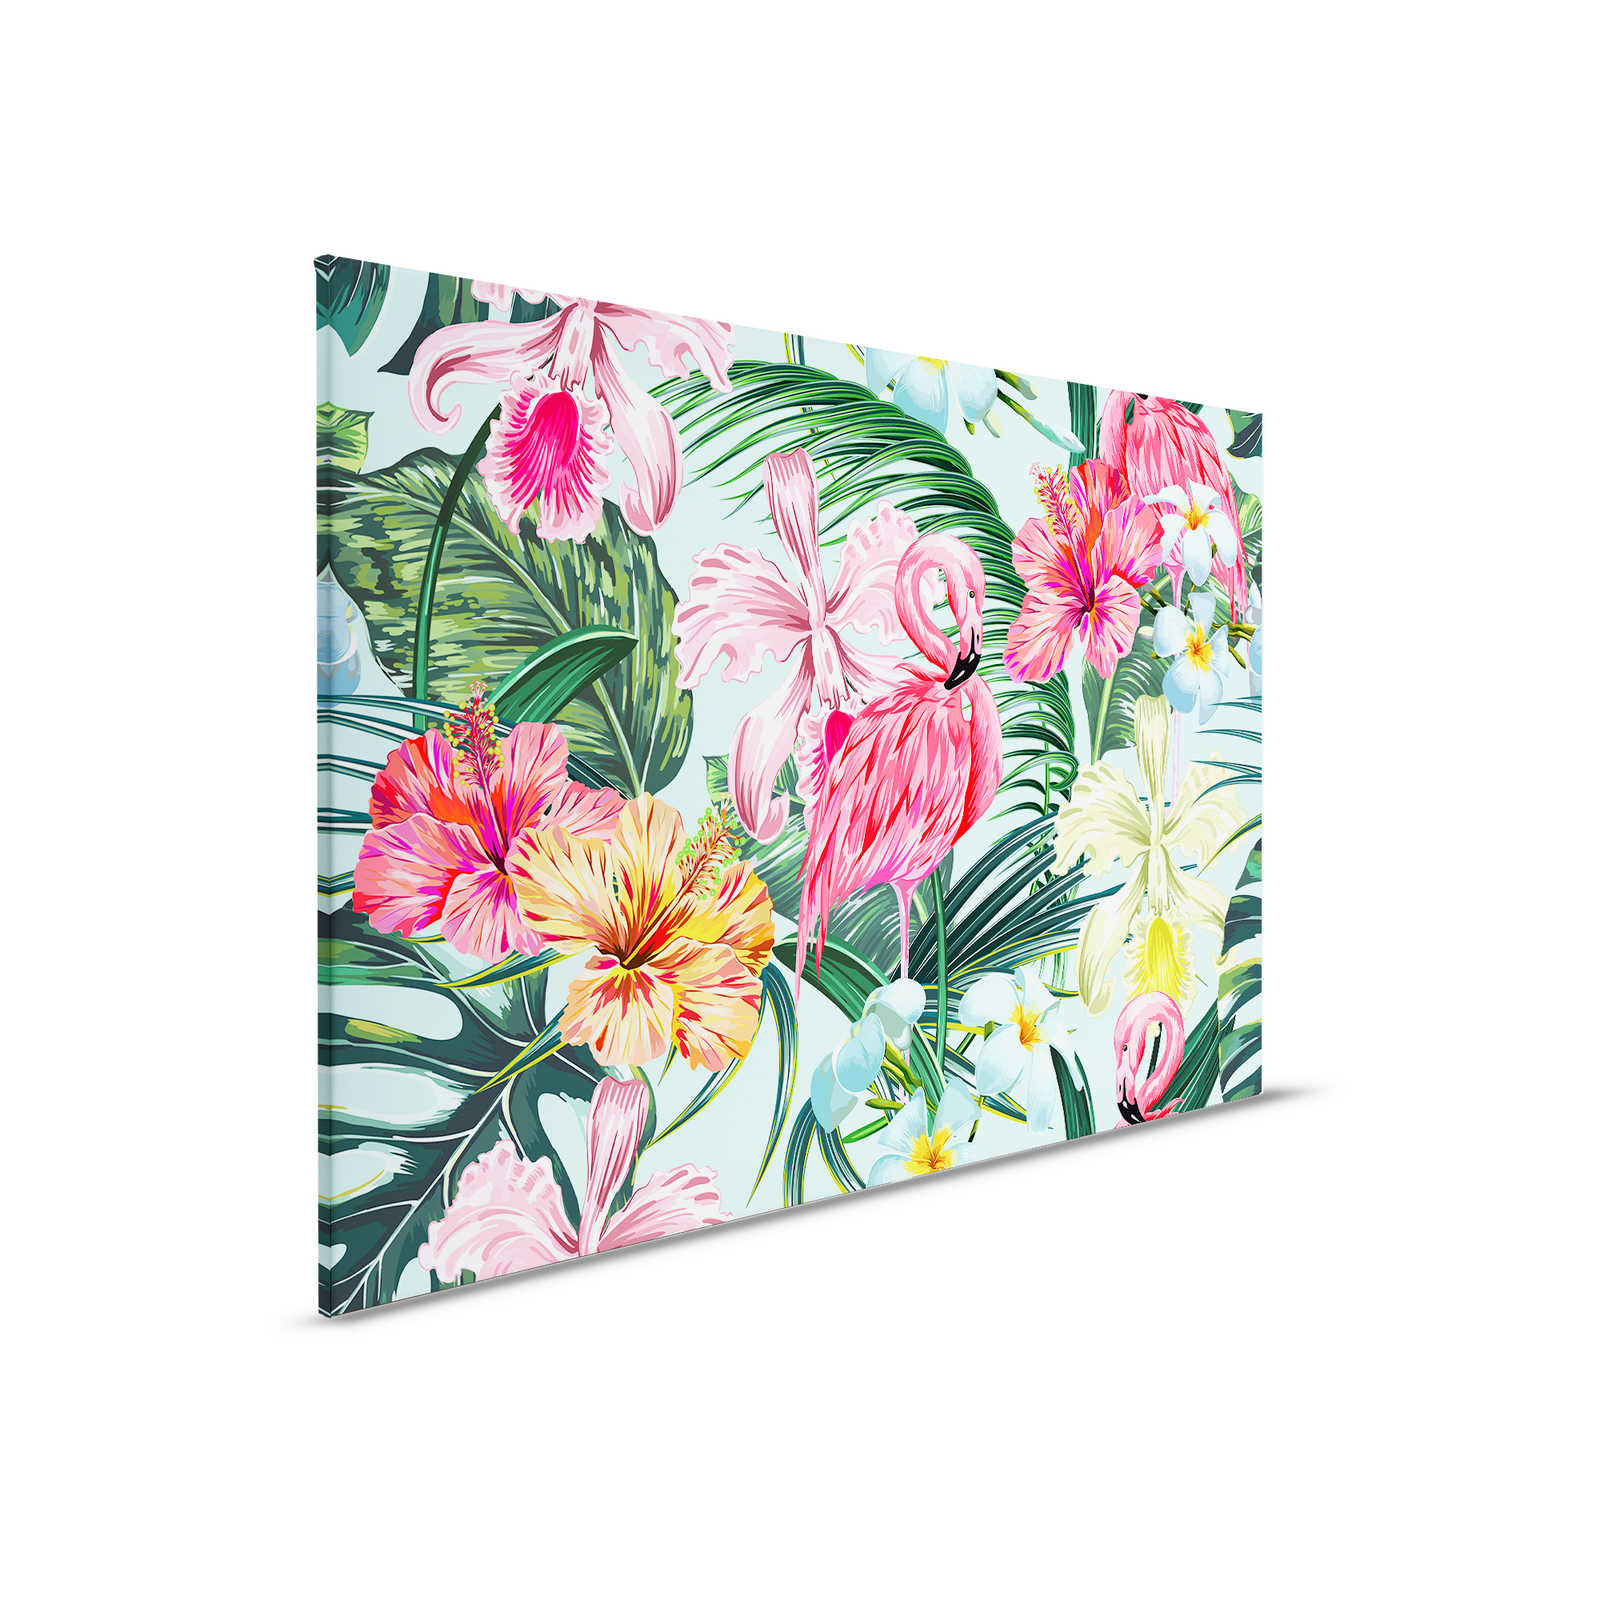         Tropical Canvas with Flamingo - 0.90 m x 0.60 m
    